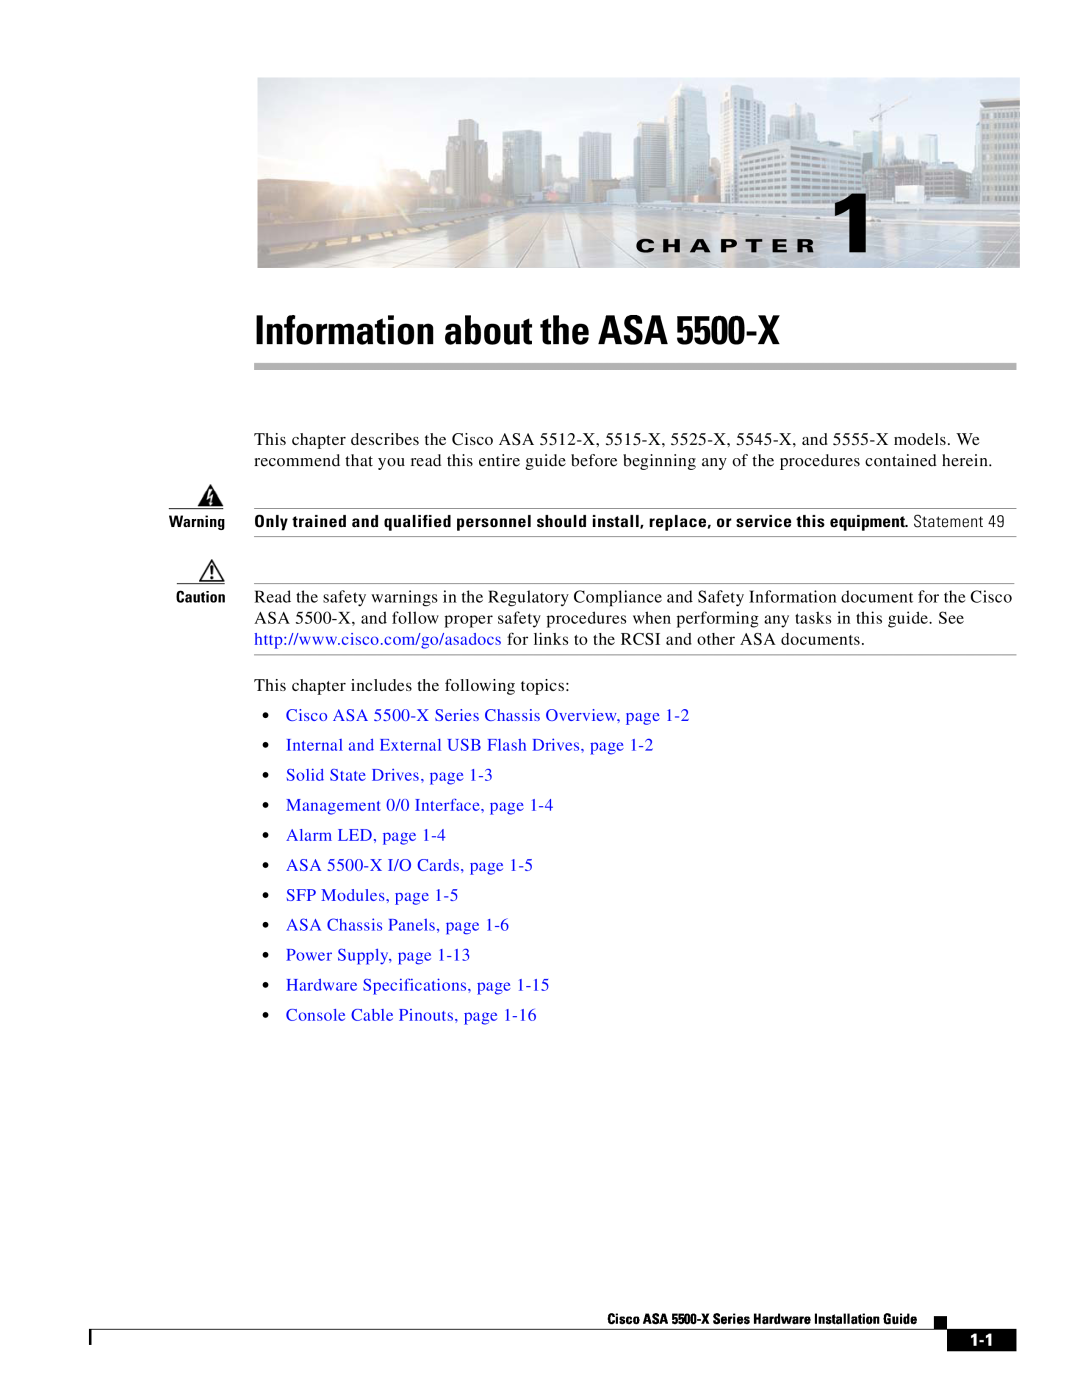 Cisco Systems ASA5515K9 manual Information about the ASA, C H A P T E R, Cisco ASA 5500-X Series Chassis Overview, page 